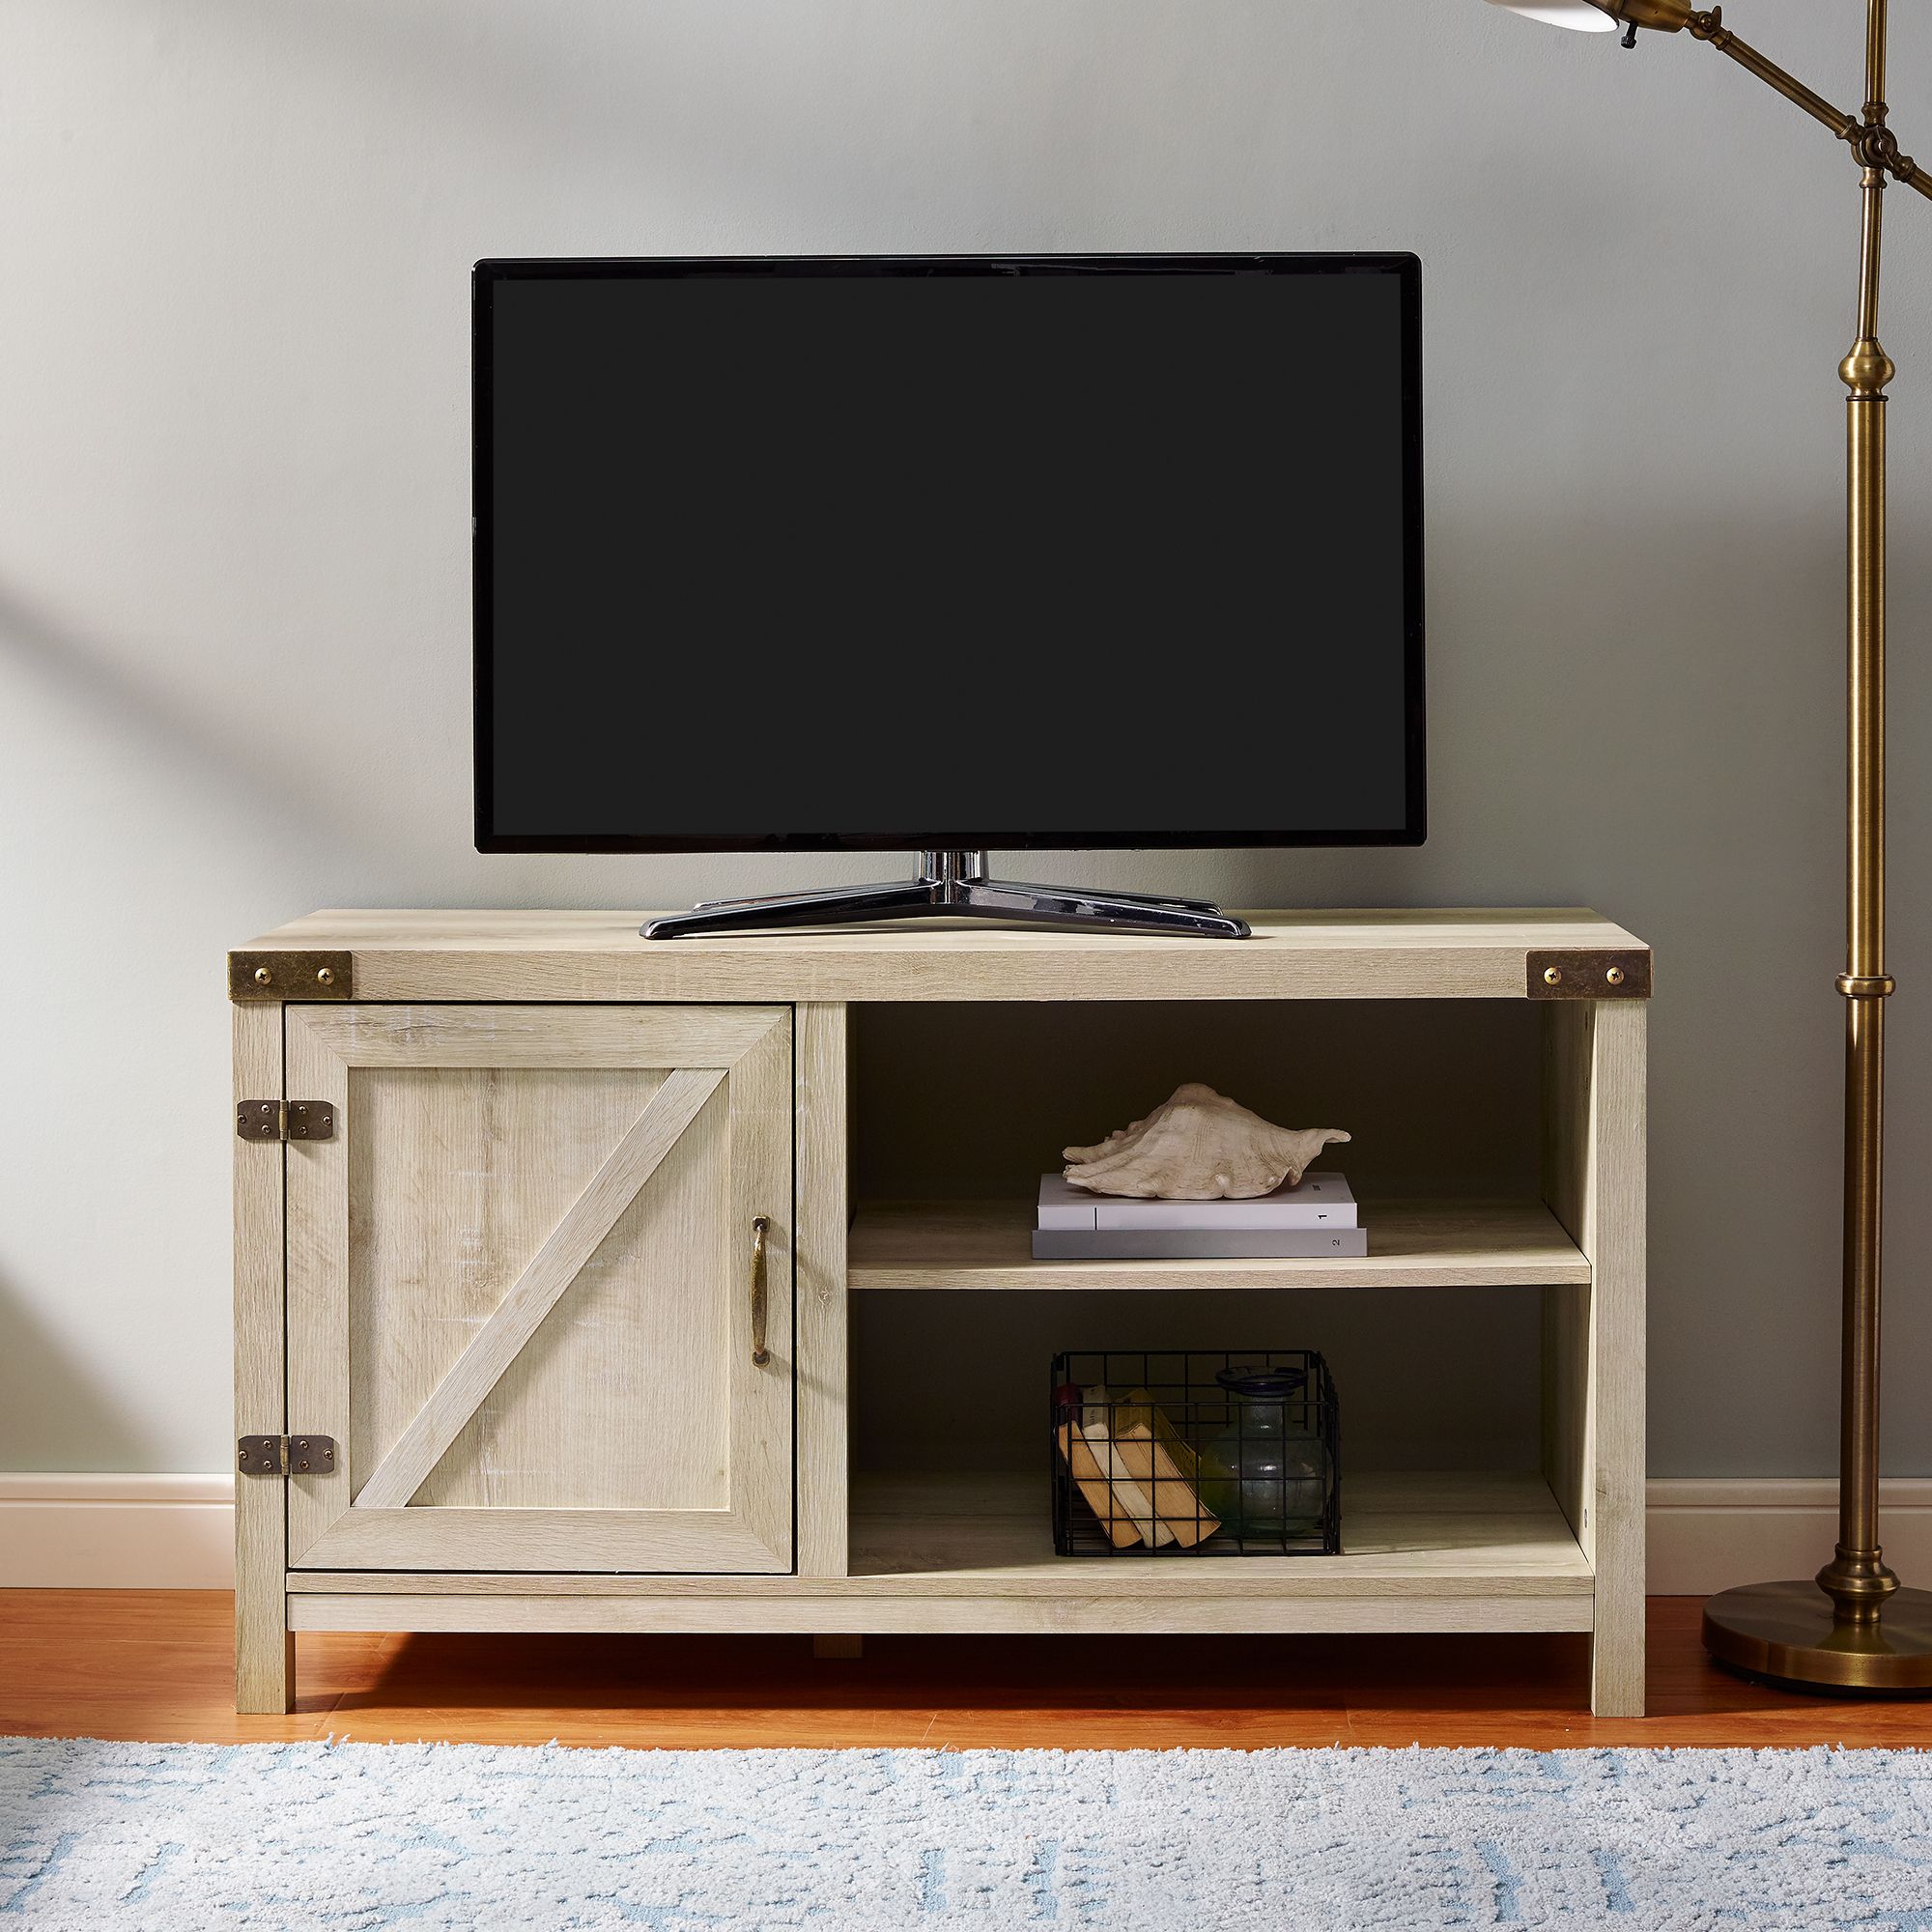 Woven Paths Farmhouse Barn Door Tv Stand For Tvs Up To 50 With Tv Stands For Tvs Up To 50" (View 7 of 15)